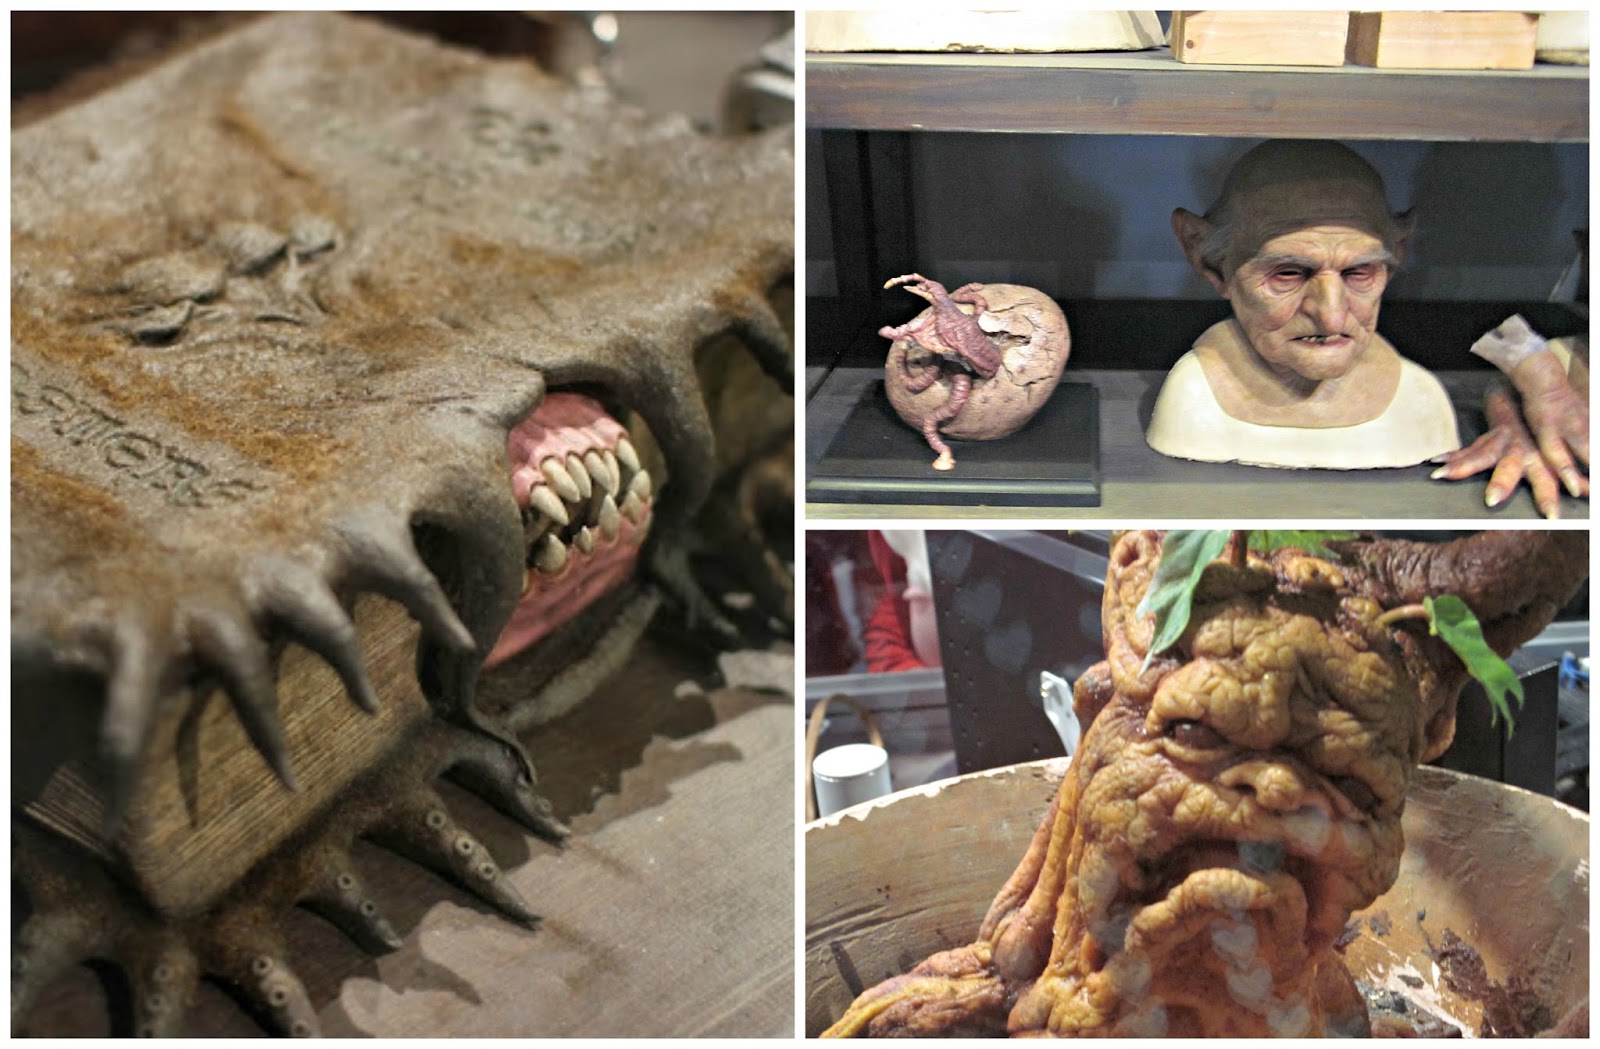 The Creature Shop at The Making Of Harry Potter Warner Brothers Studio Tour inc. Monster book of Monsters and Mandrake